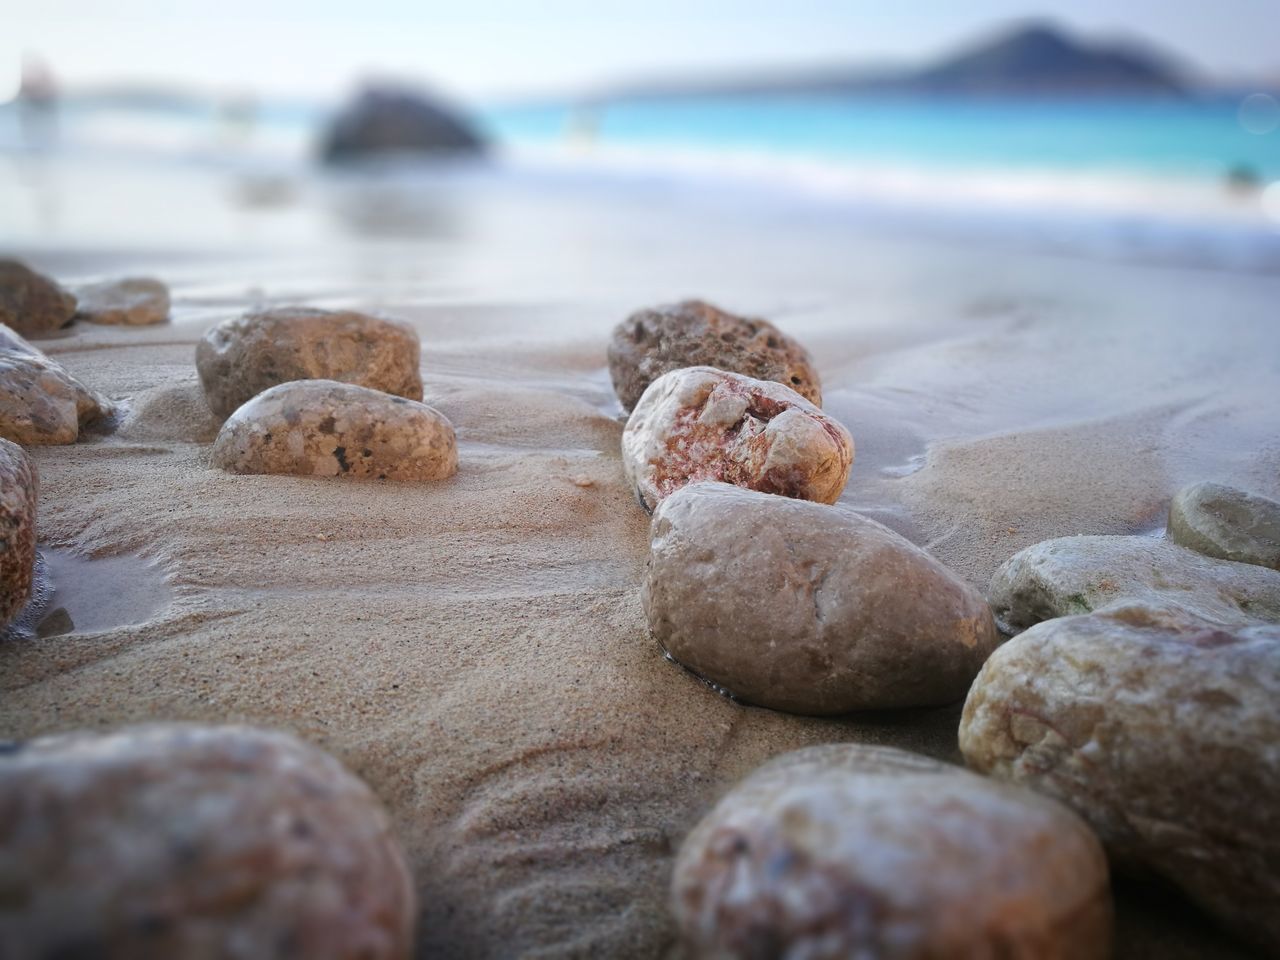 beach, sea, water, land, solid, no people, rock, selective focus, nature, rock - object, day, beauty in nature, tranquility, sand, close-up, stone, surface level, outdoors, pebble